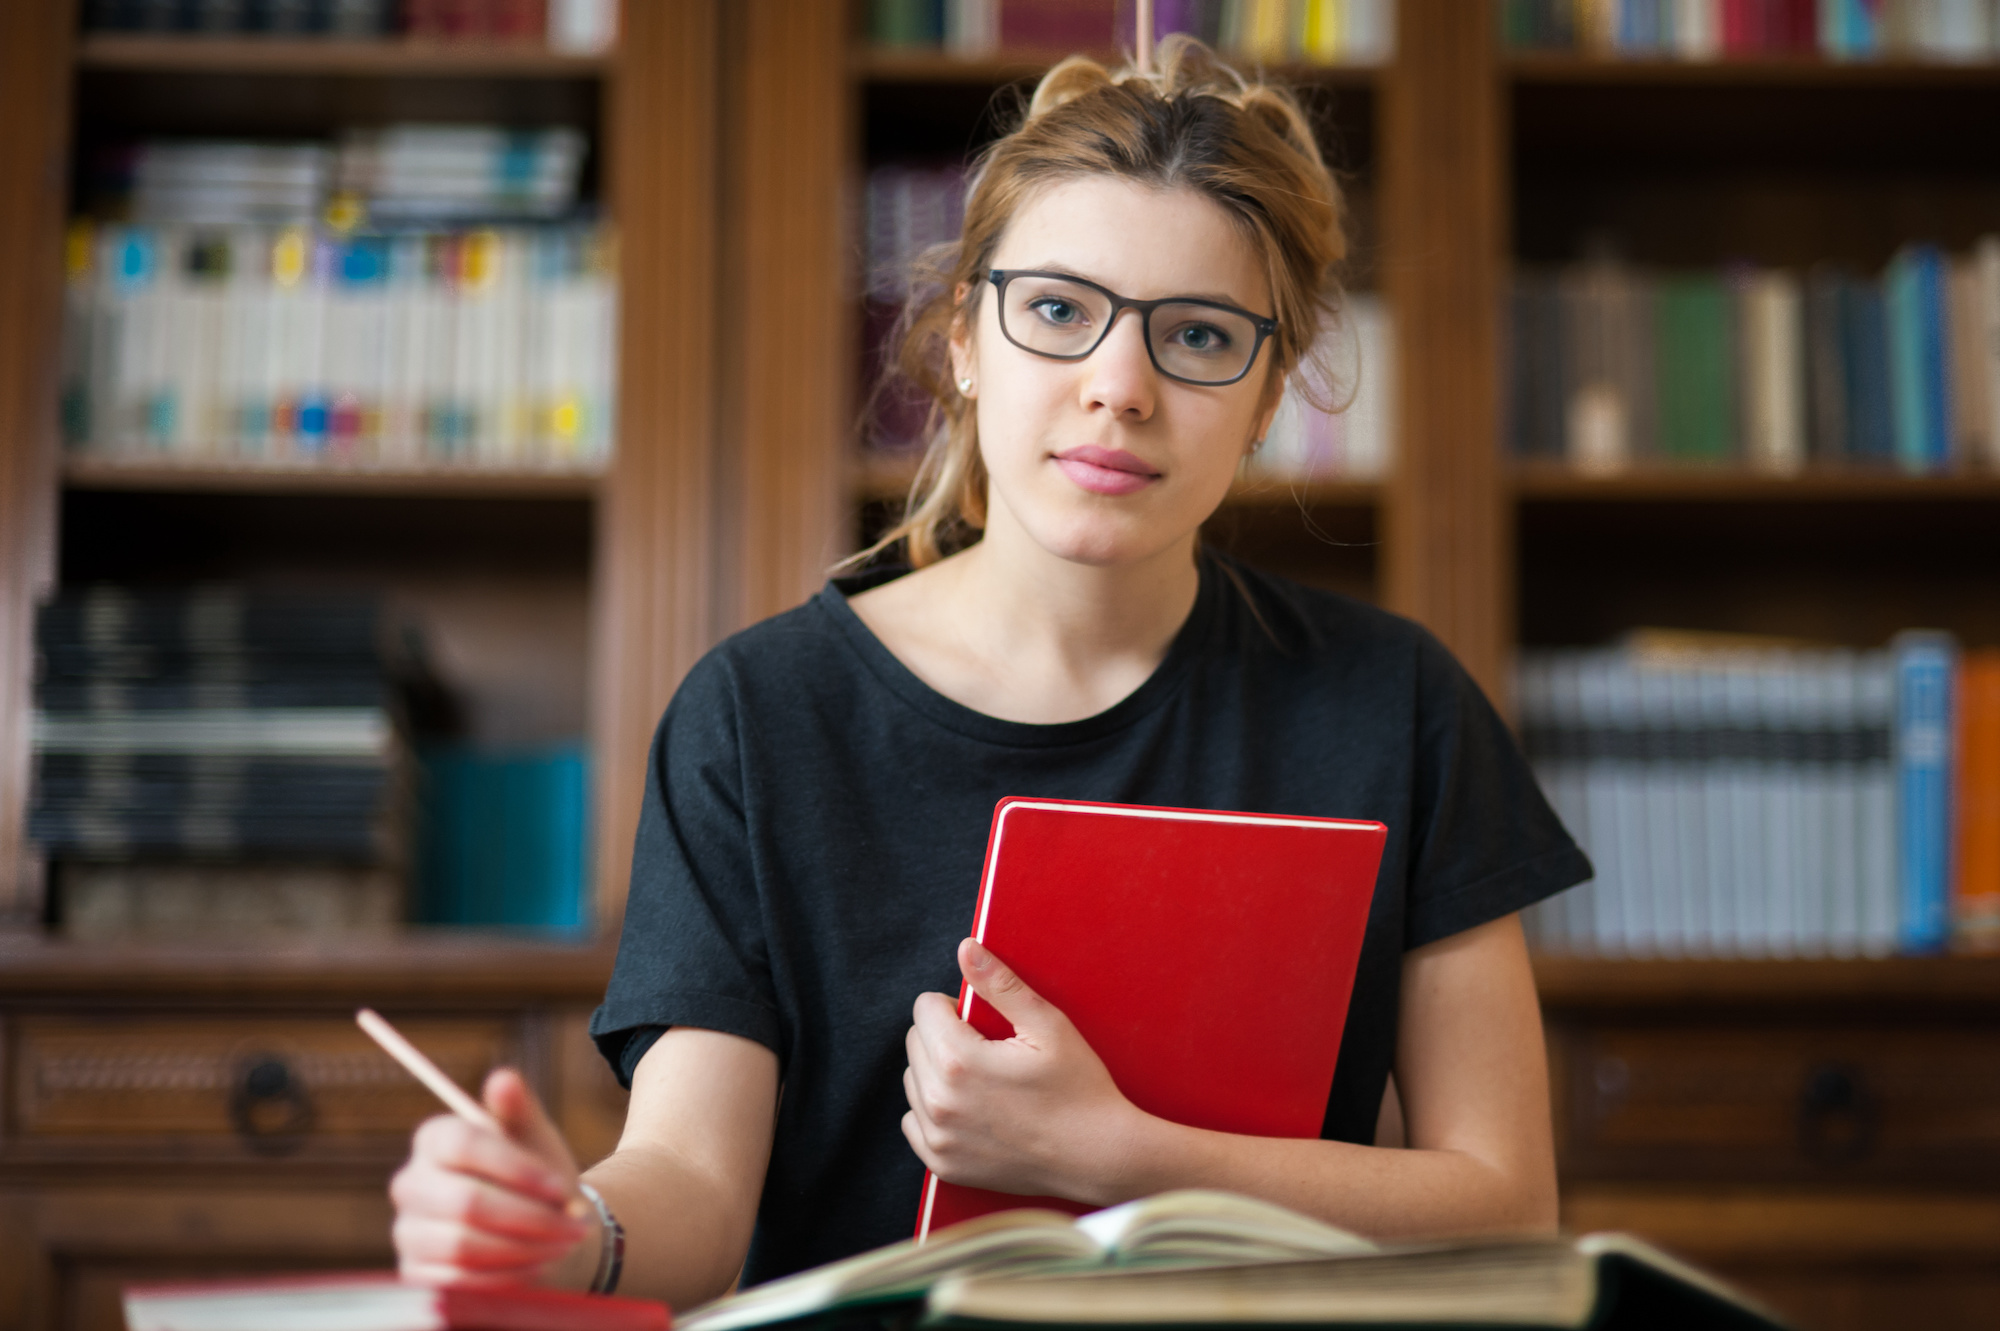 Female student in a library with book in hands